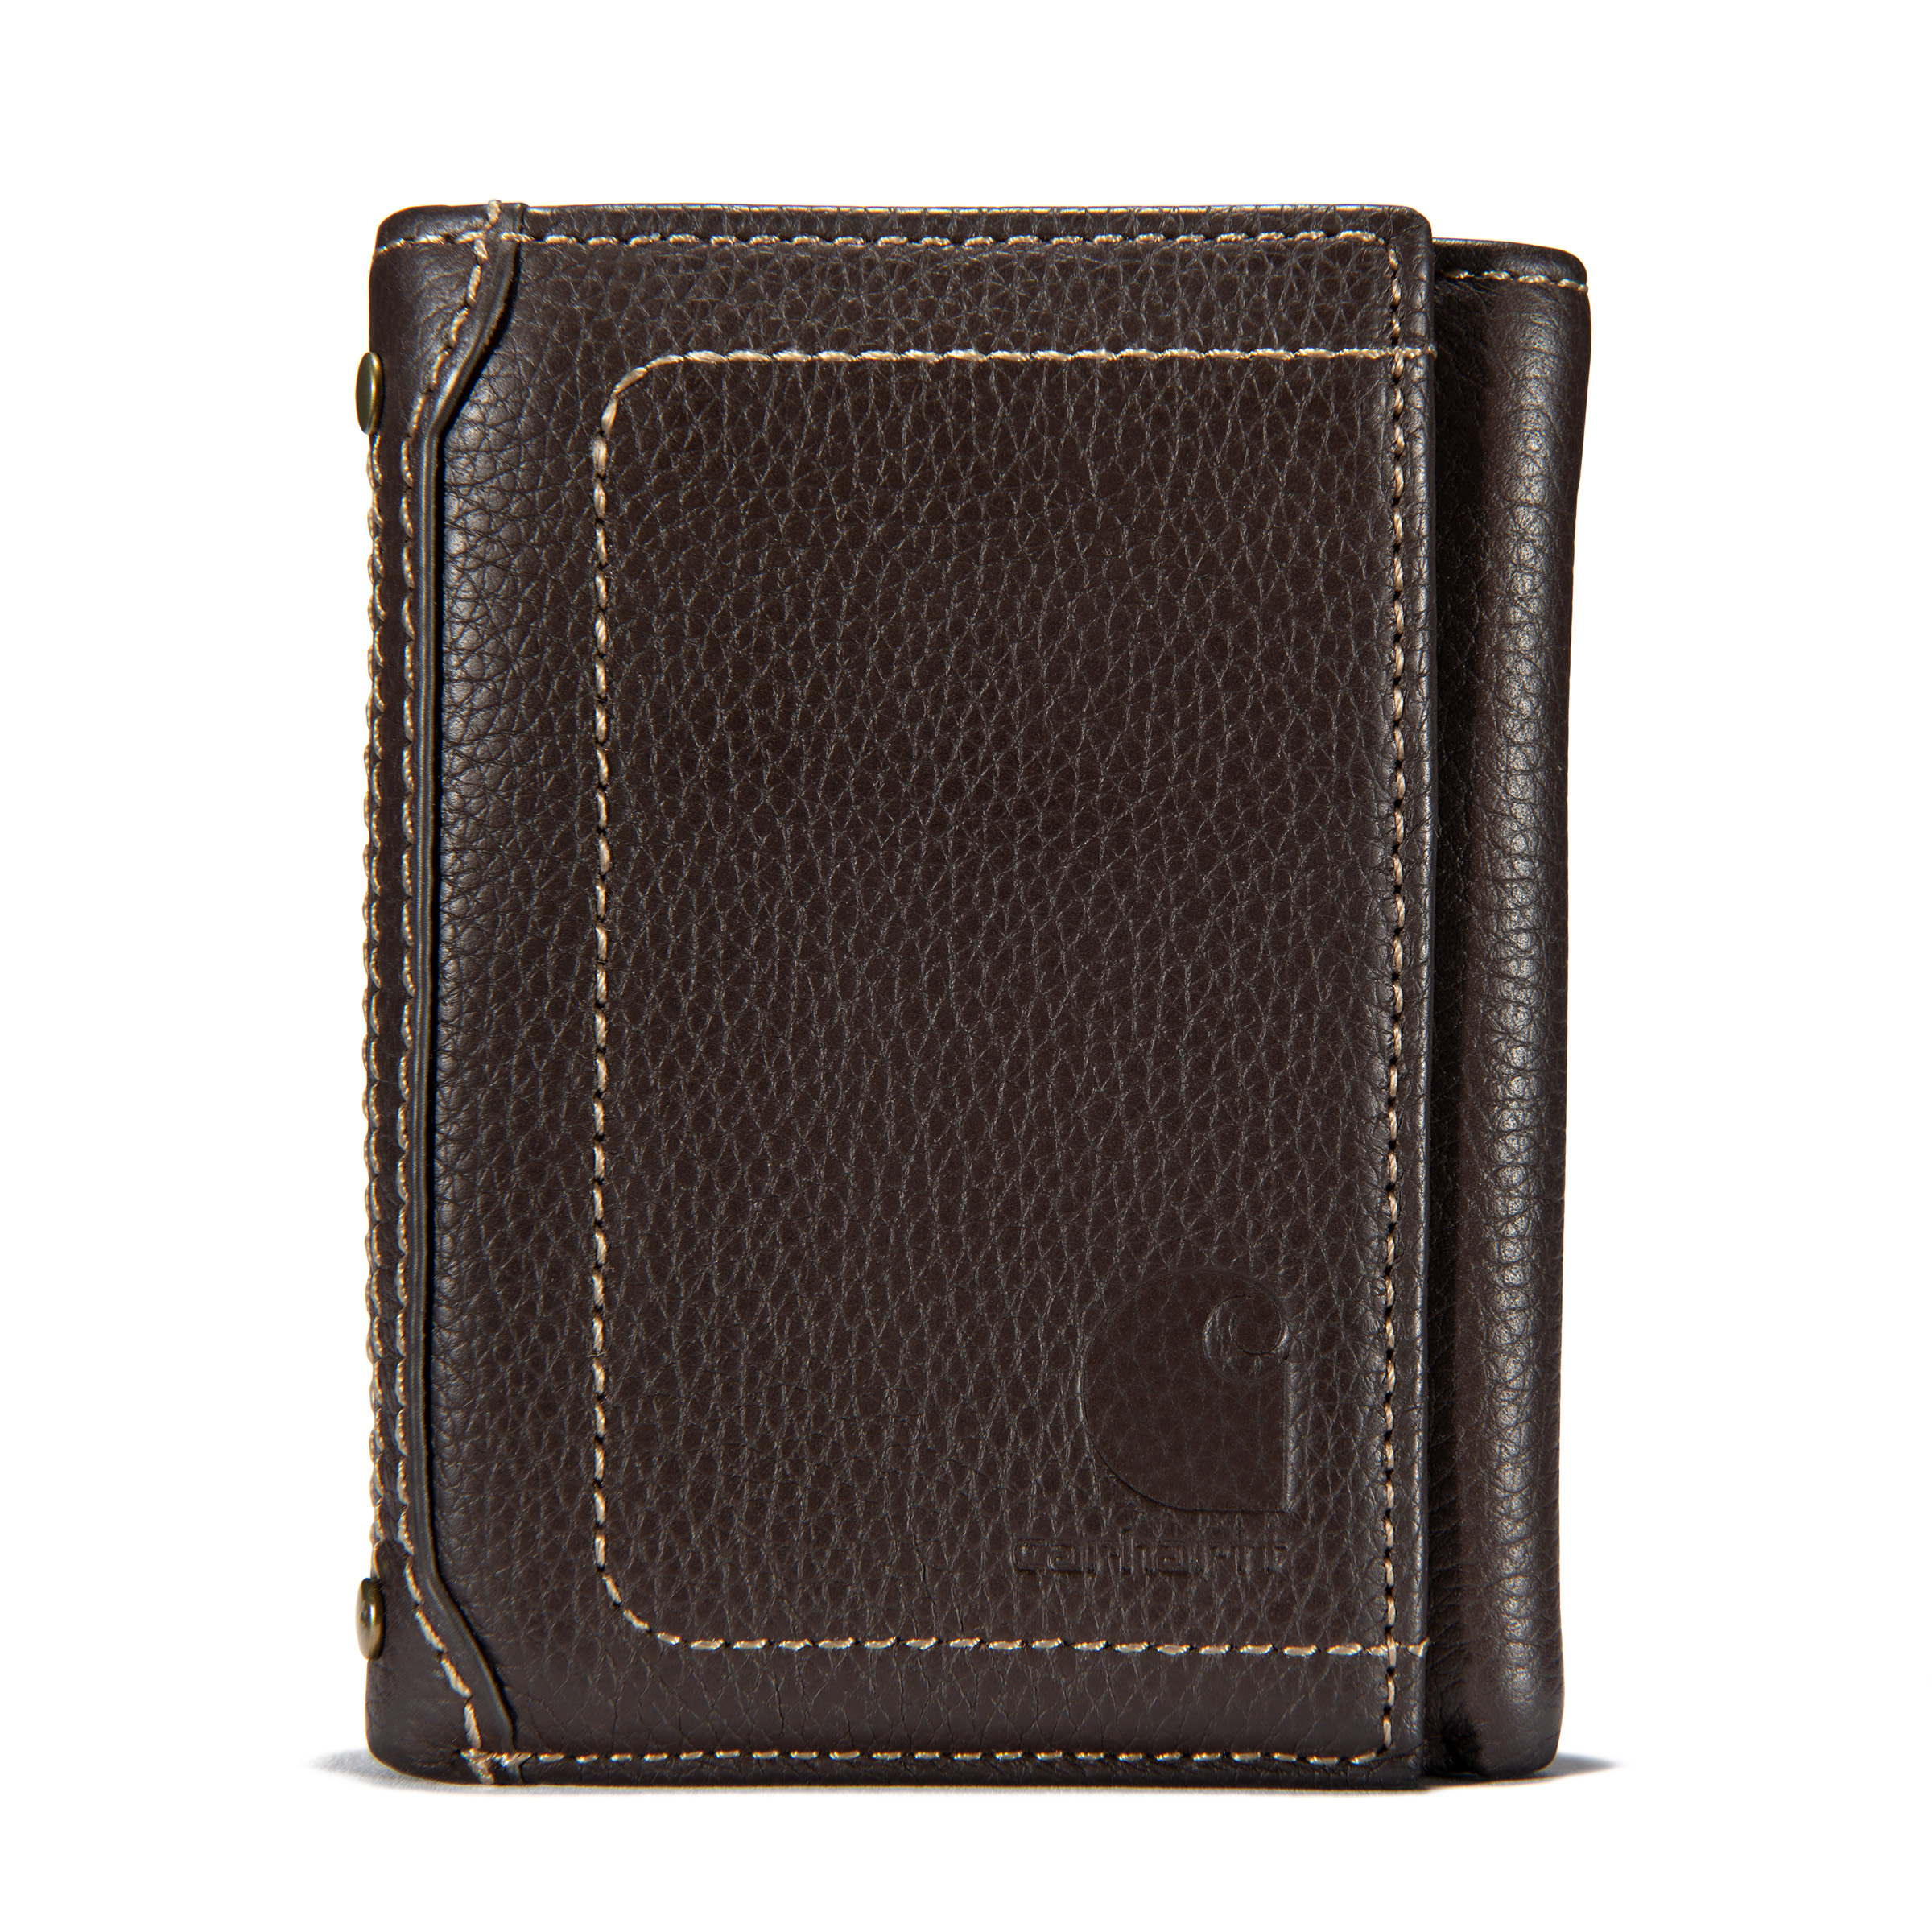 Picture of Carhartt B0000209 Mens Pebble Leather Trifold Wallet